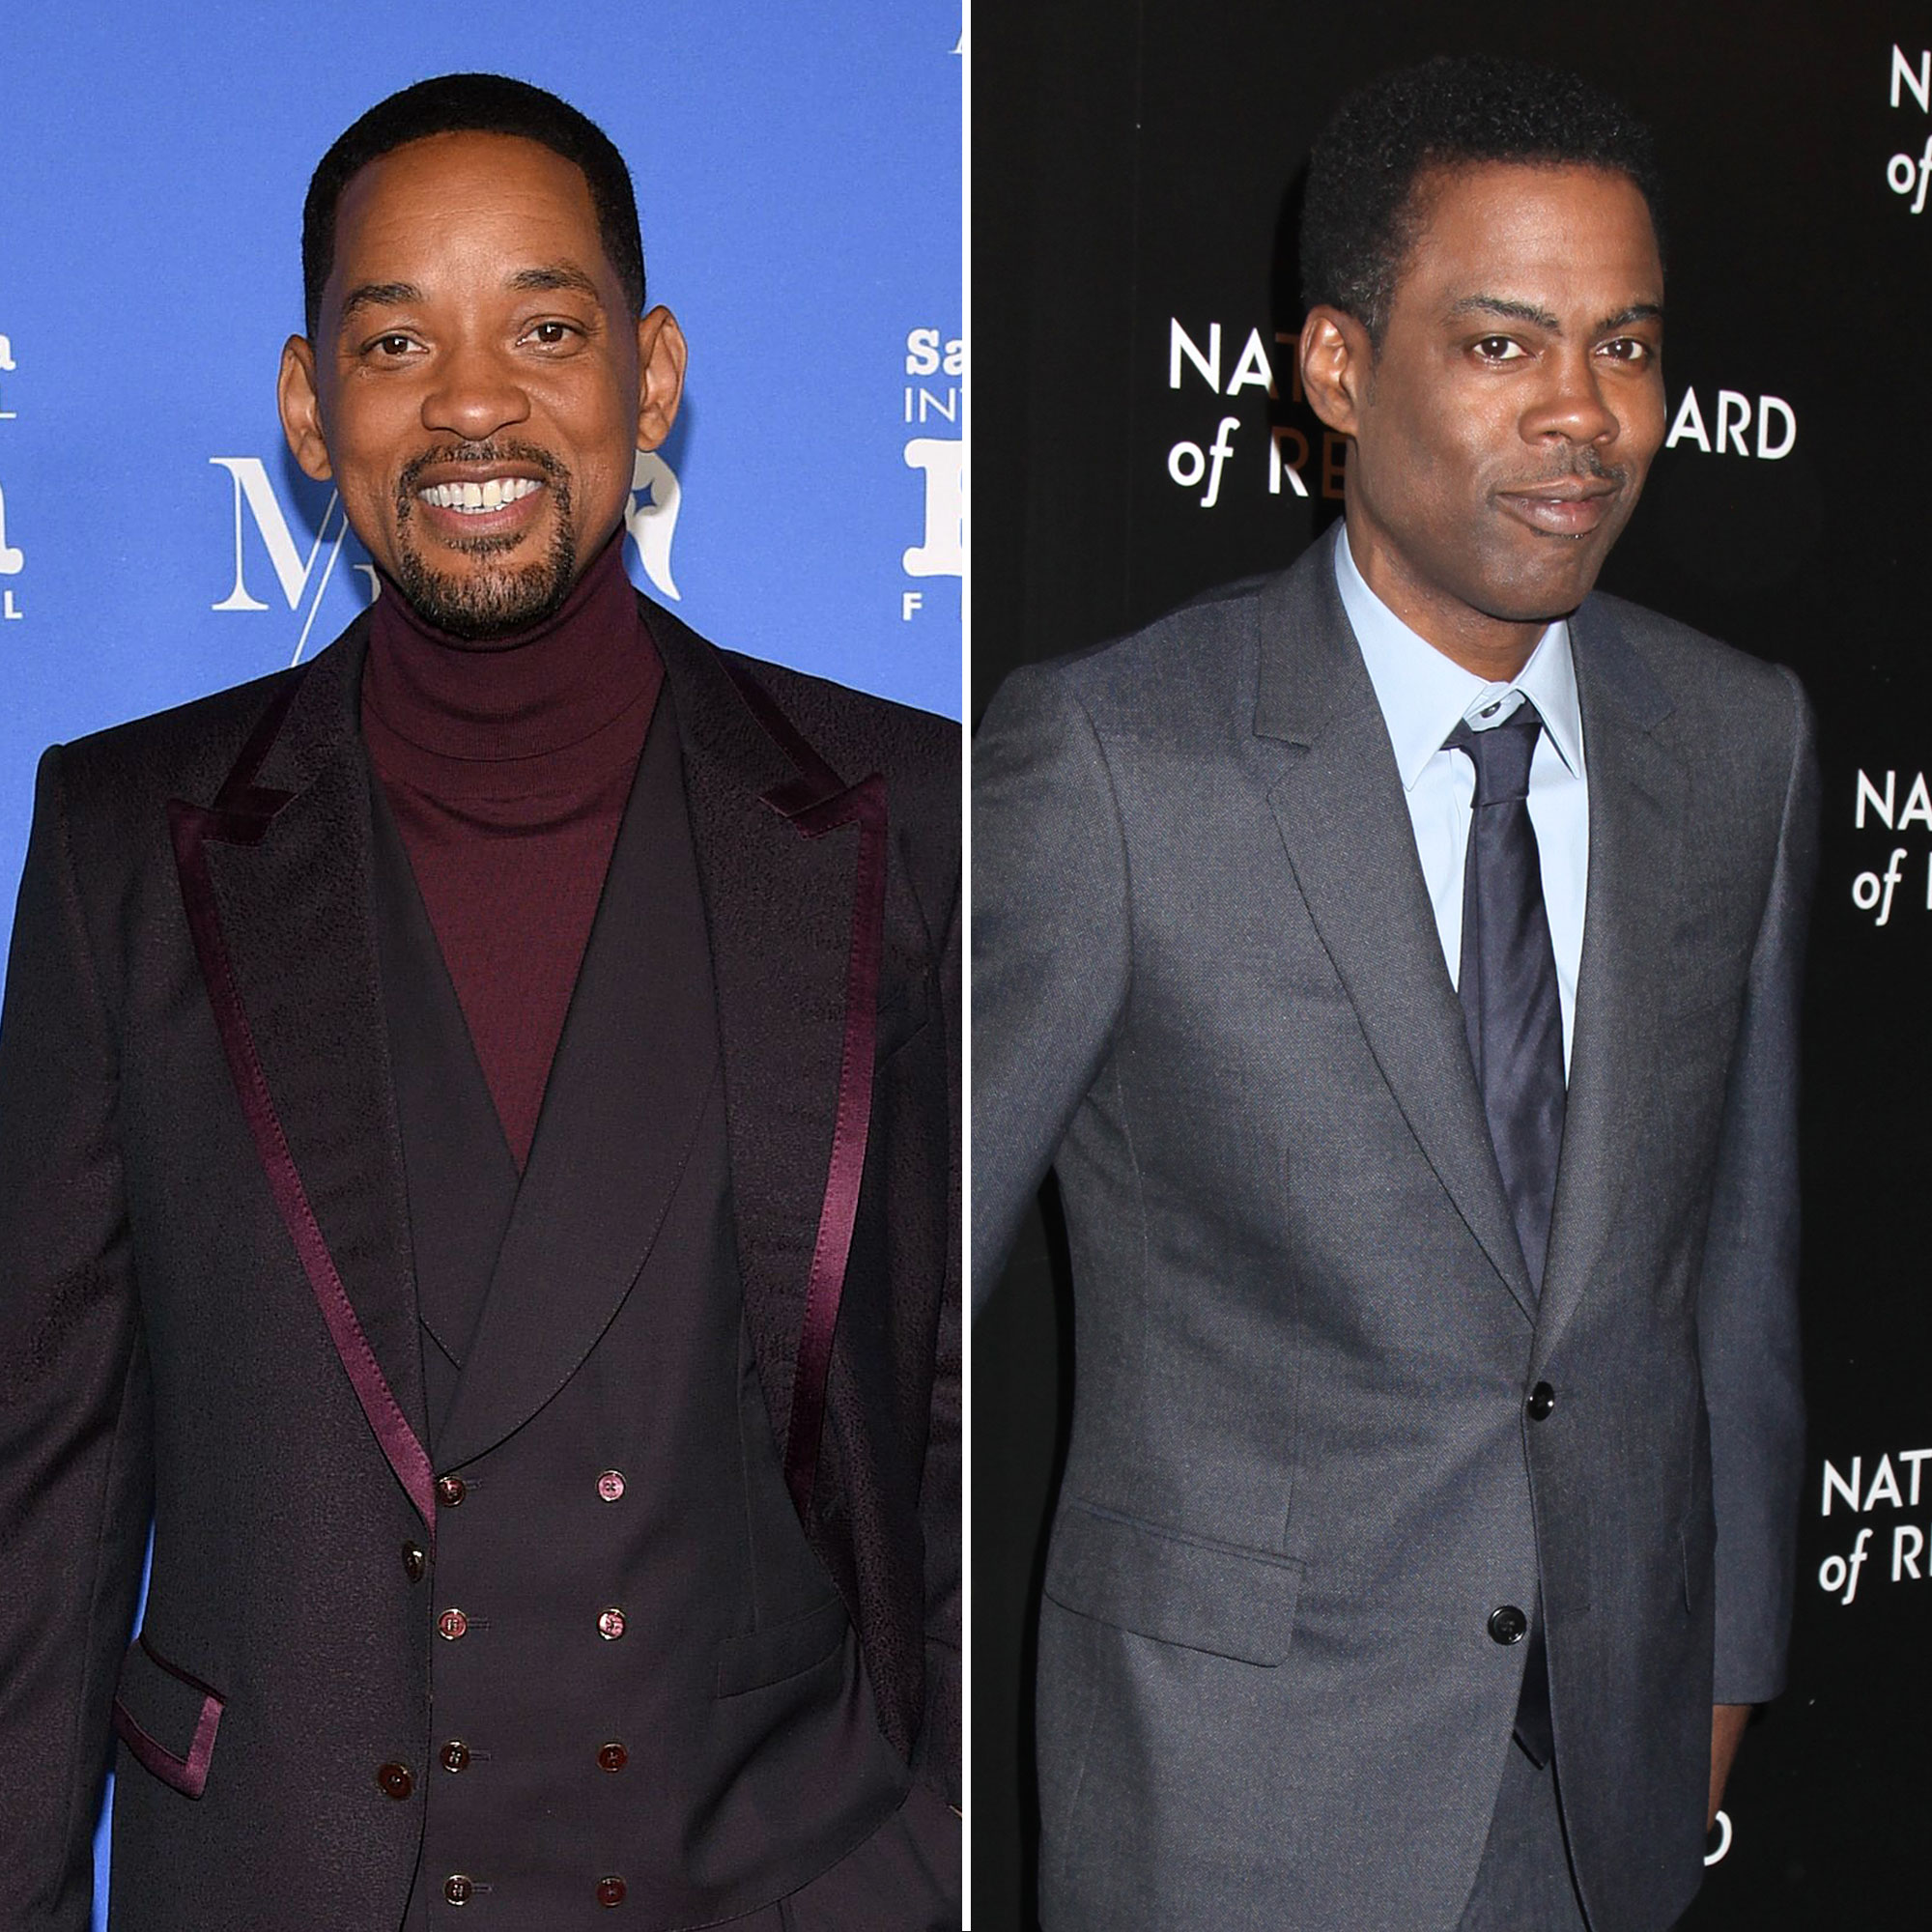 Will Smith Slaps Chris Rock -- Was It 'Protecting' Or Going Too